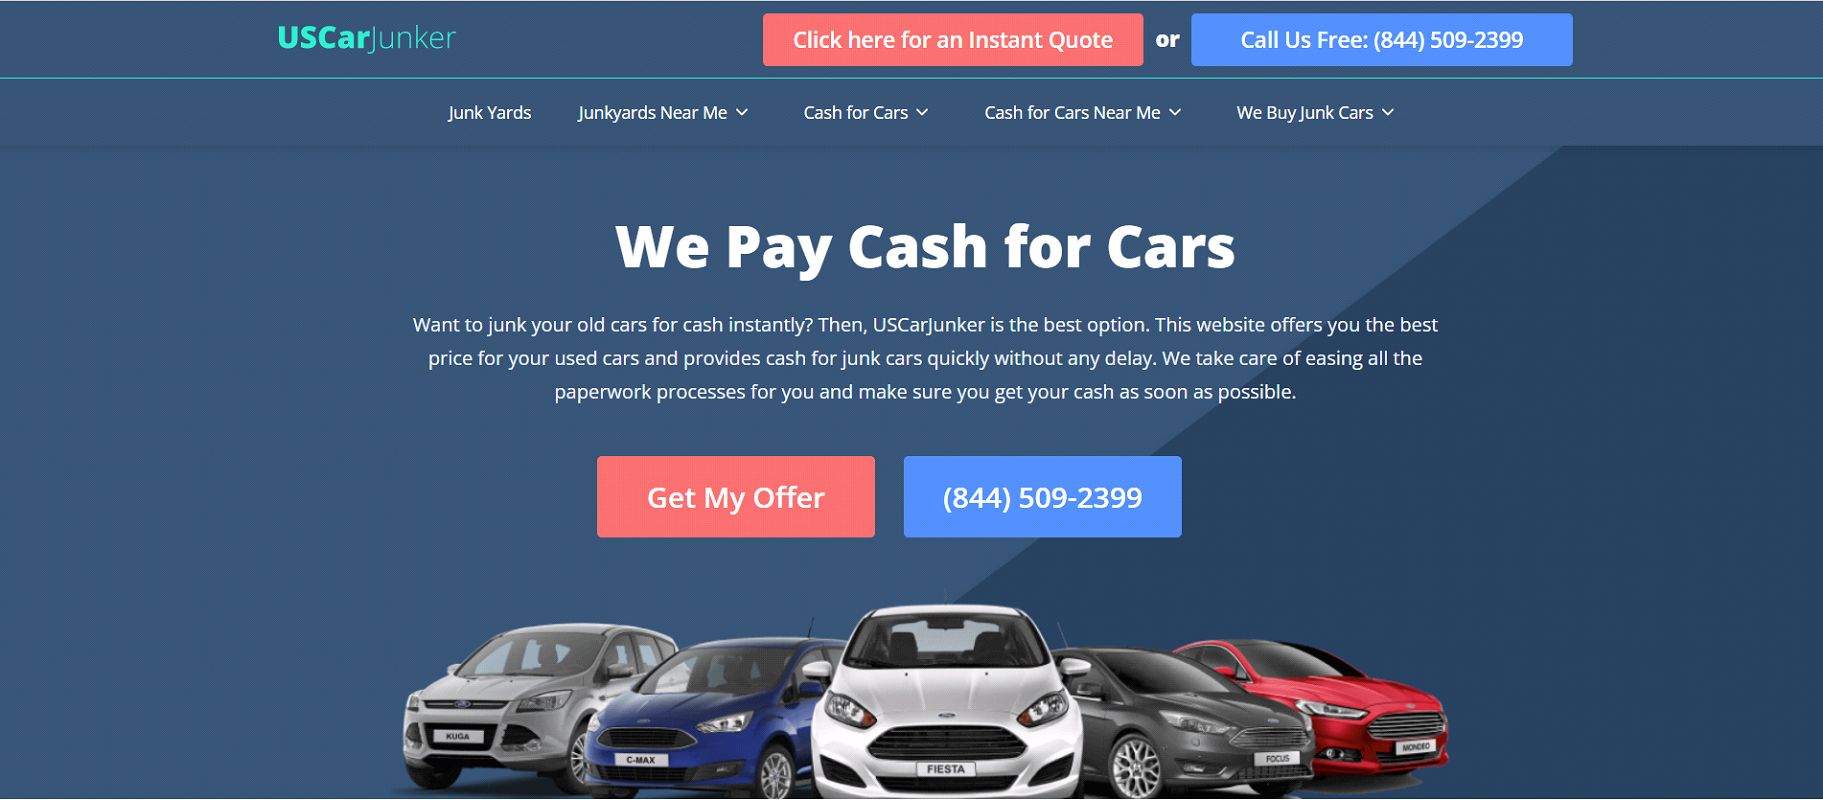 10 Best ways to get cash for cars near me photo 4